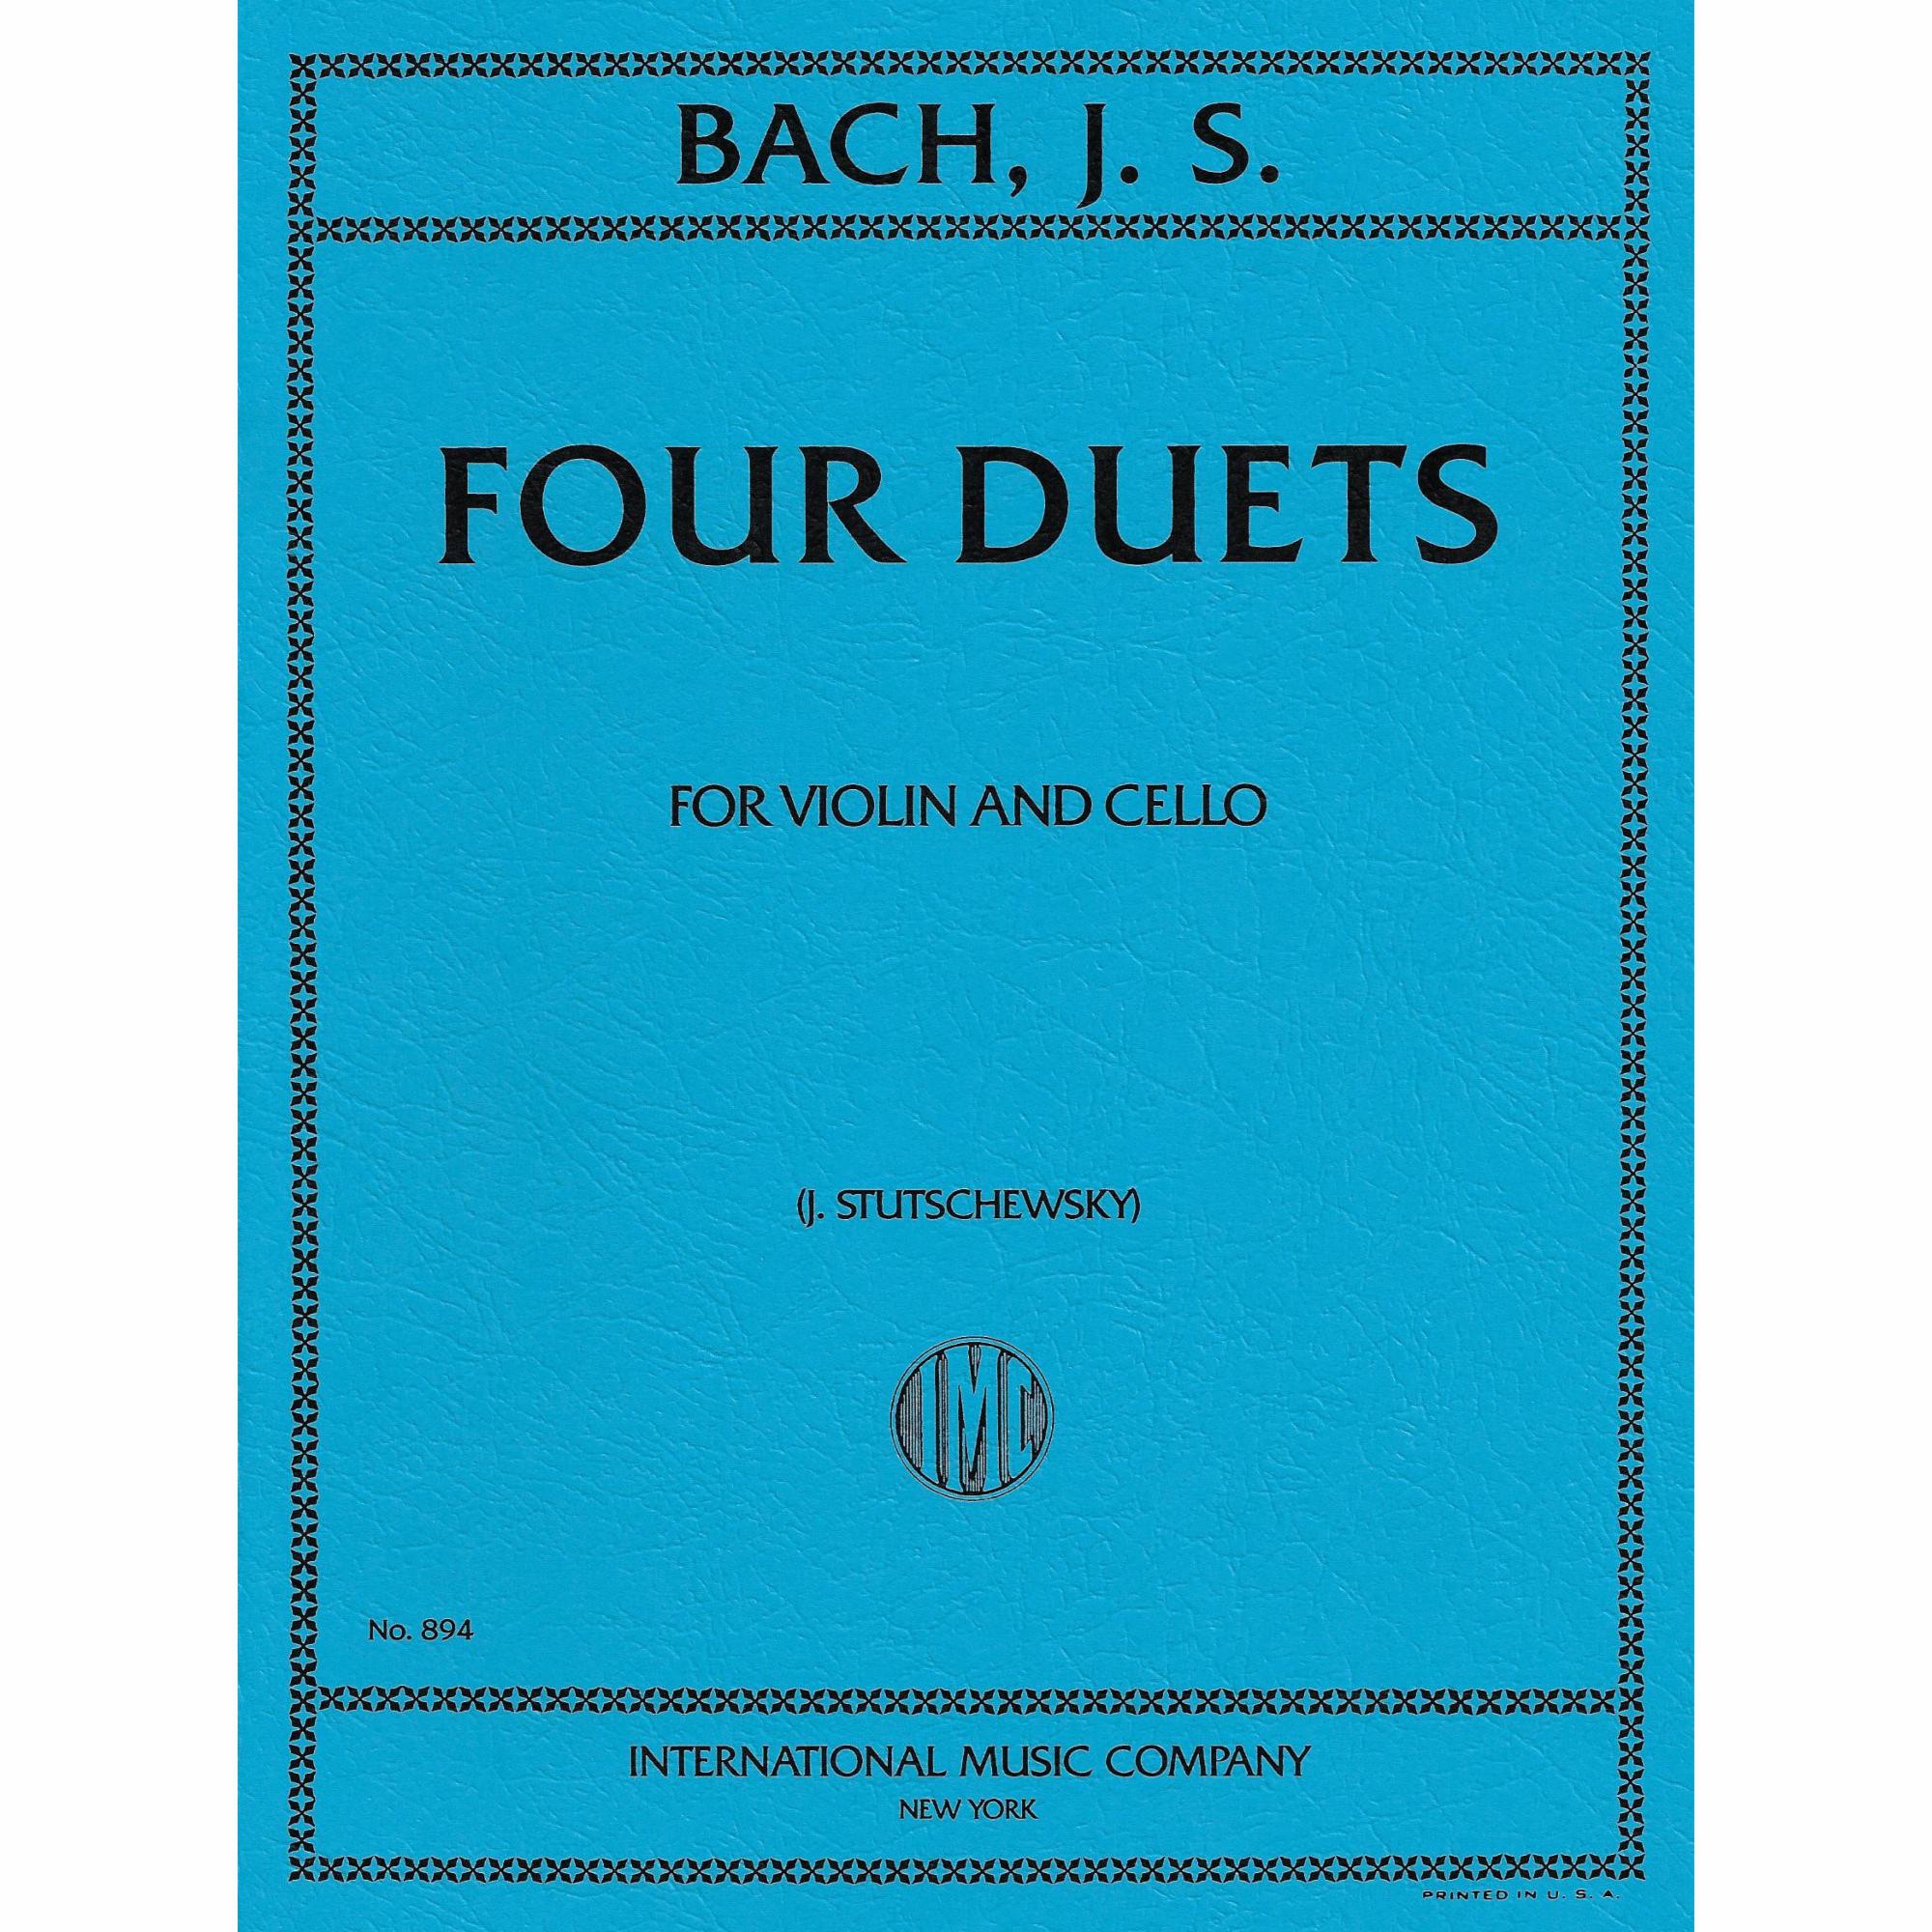 Bach -- Four Duets for Violin and Cello